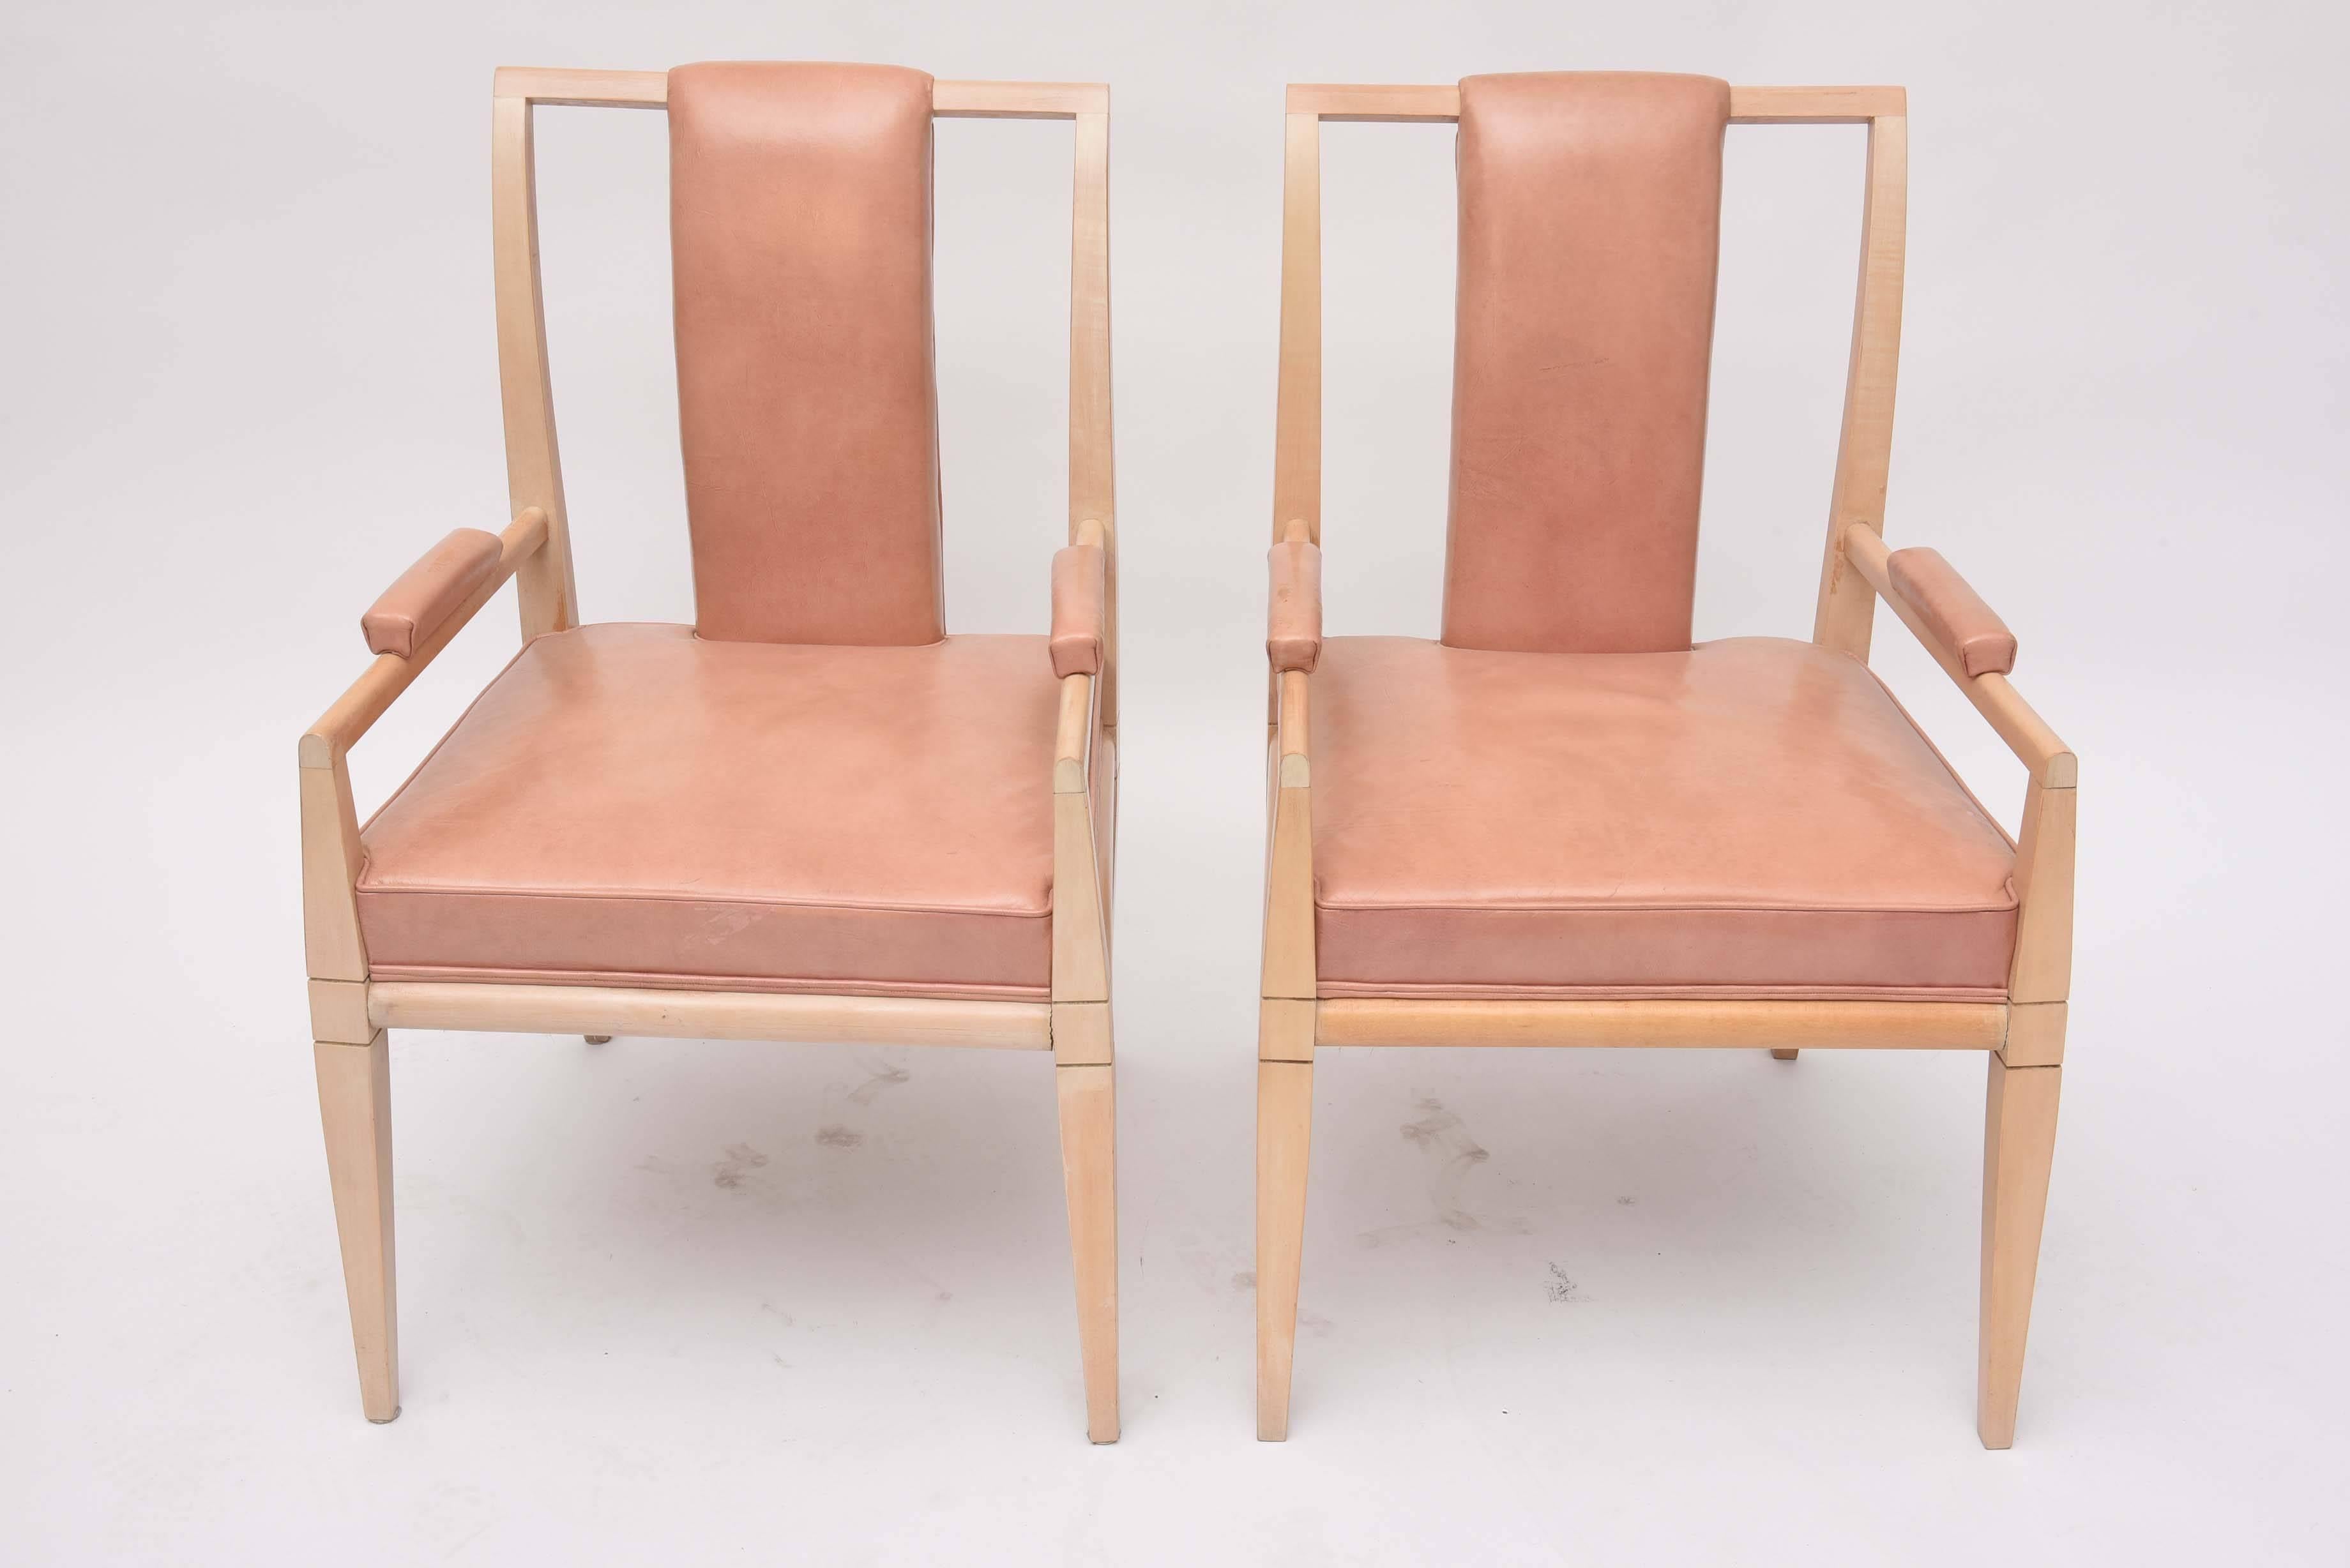 Parzinger armchairs with original leather.